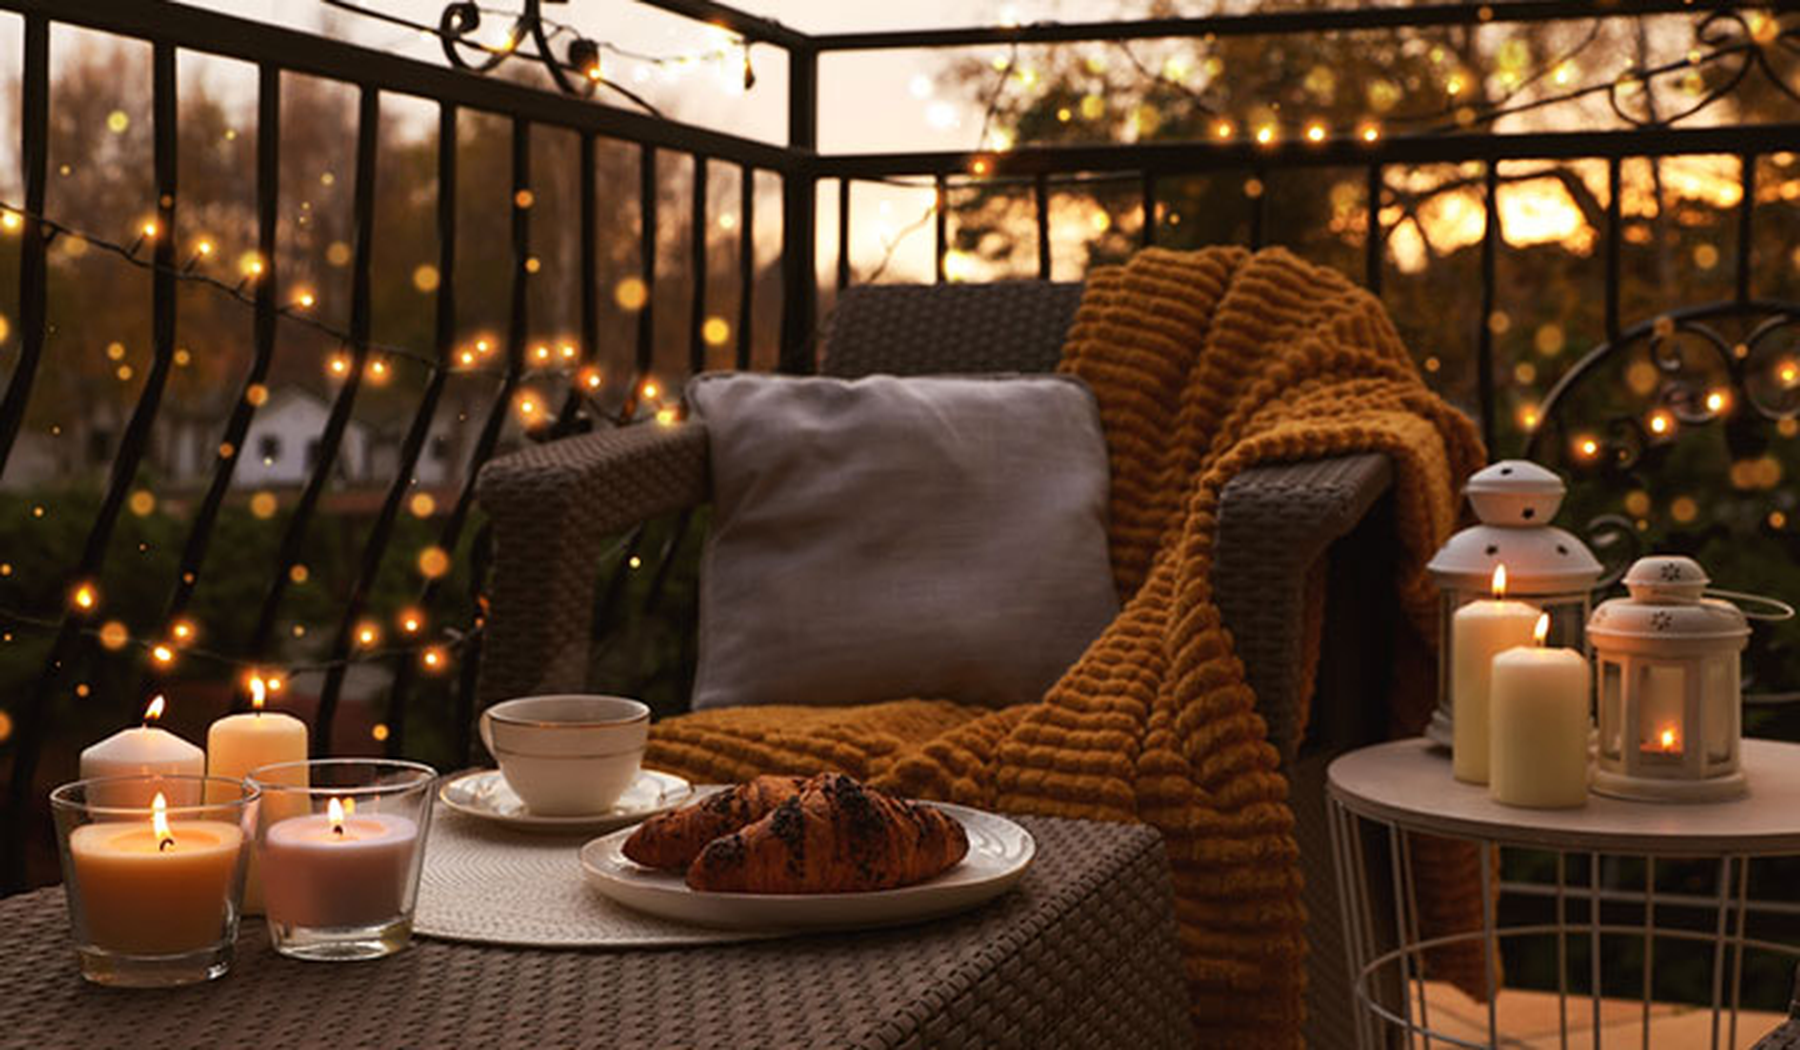 Cozy deck at dusk with string lights and candles